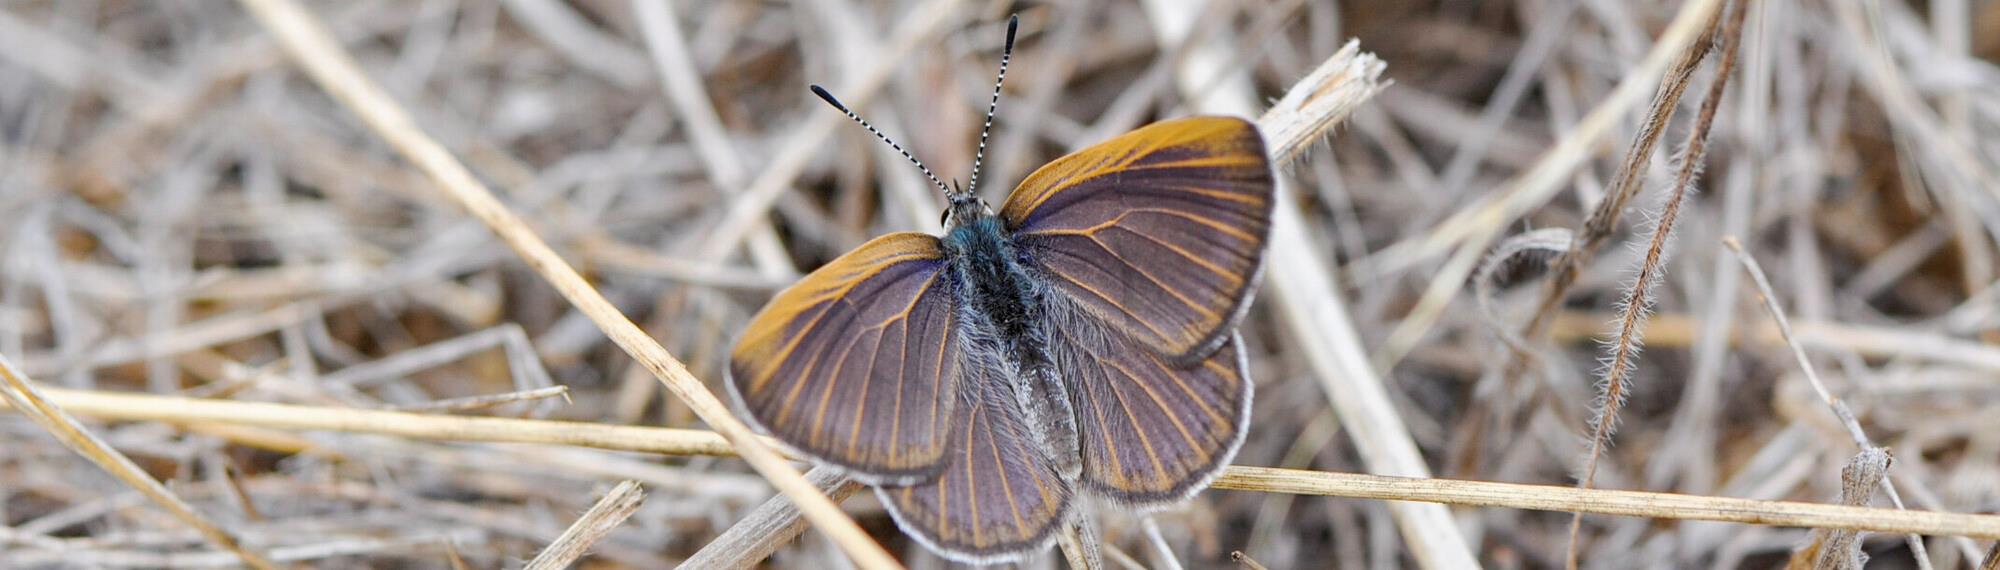 A Golden-Rayed Blue Butterfly (grey and brown with blue wings), sitting on a piece of dry grass.